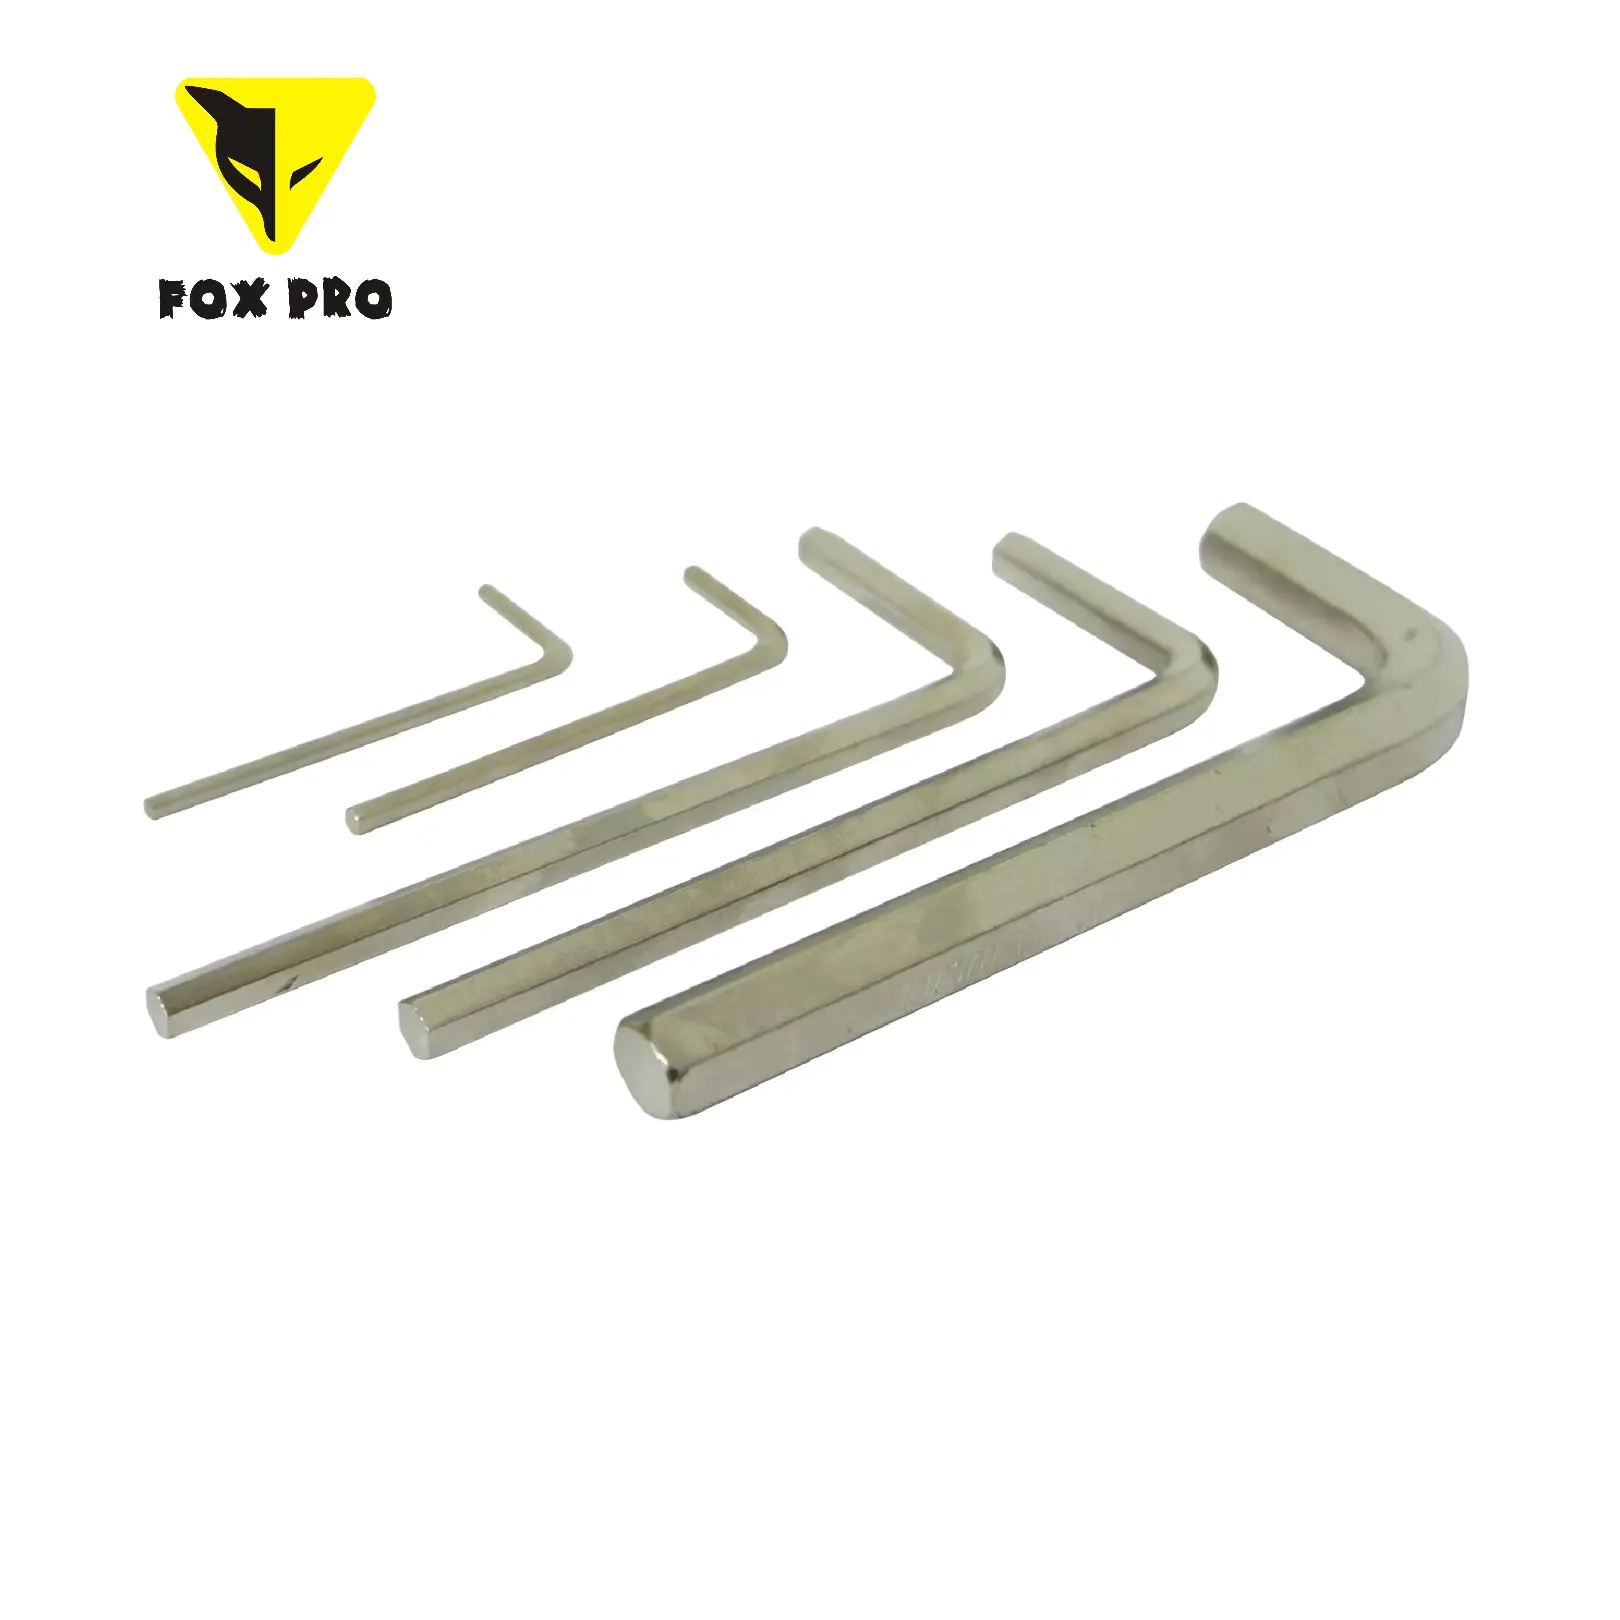 FOX PRO Speed Skating Shoes General Accessories Metal Hex Wrench